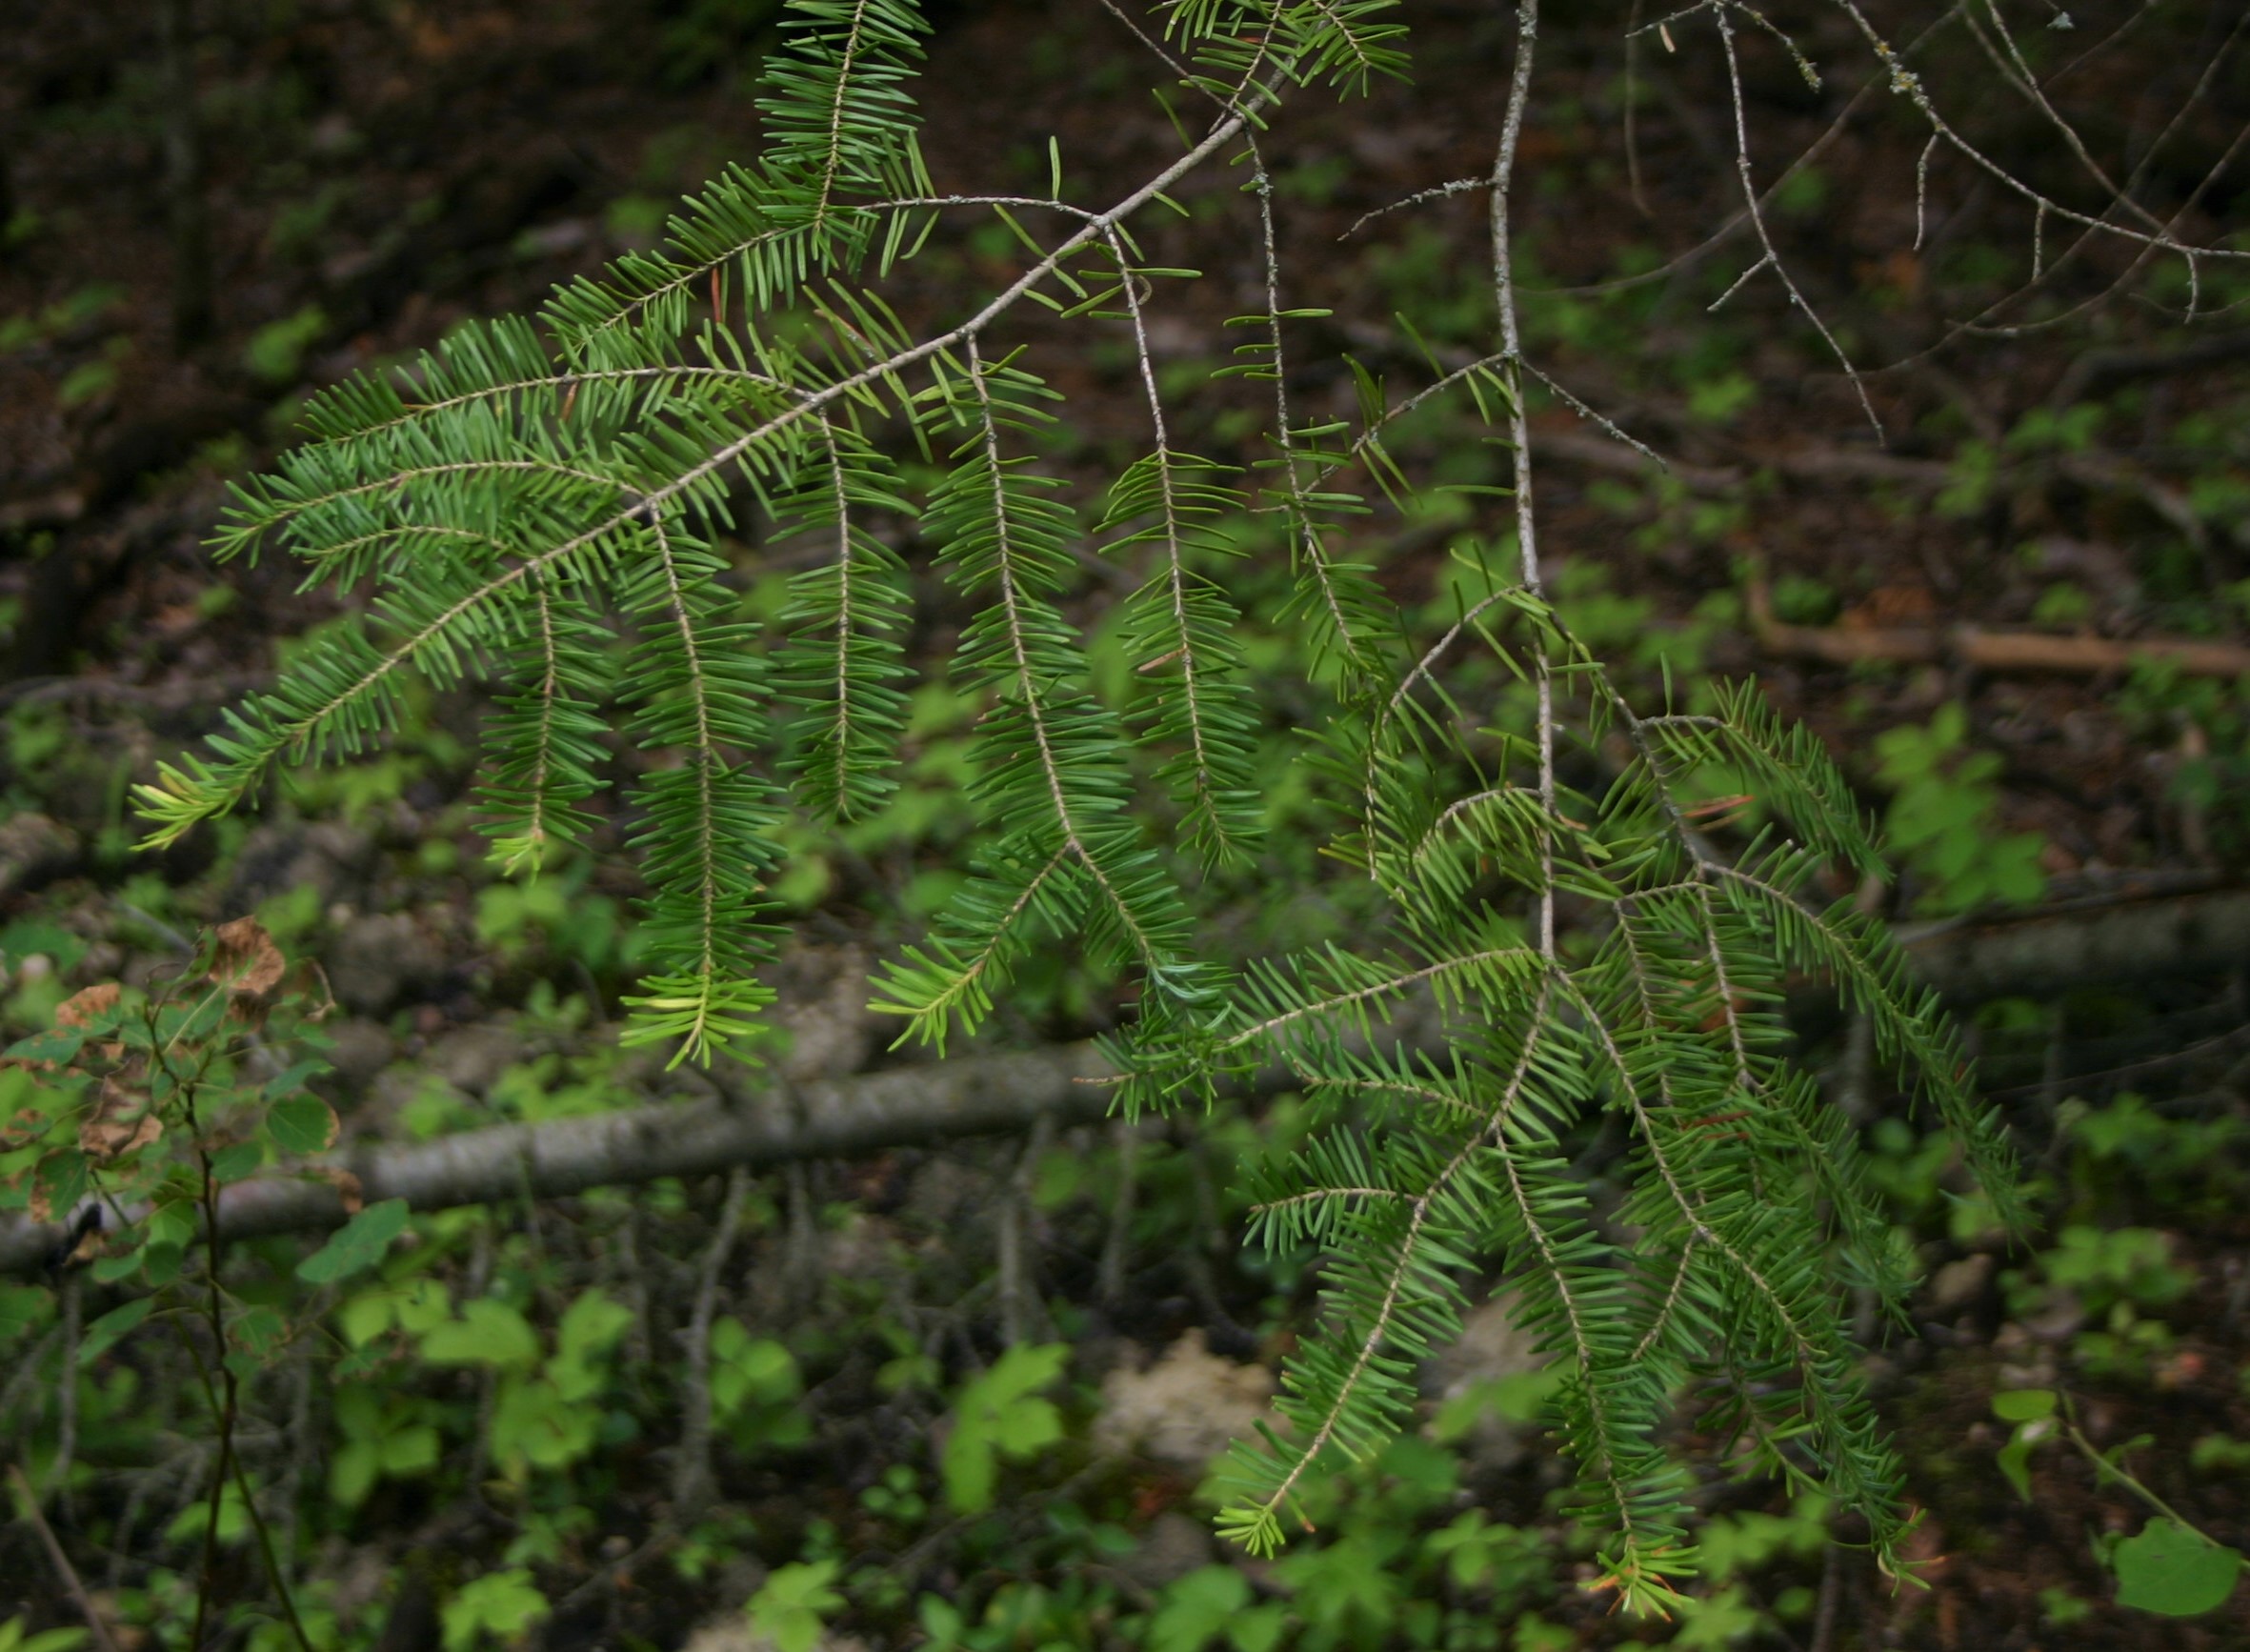 Close-up on a low-to-the-ground Balsam Fir tree branch